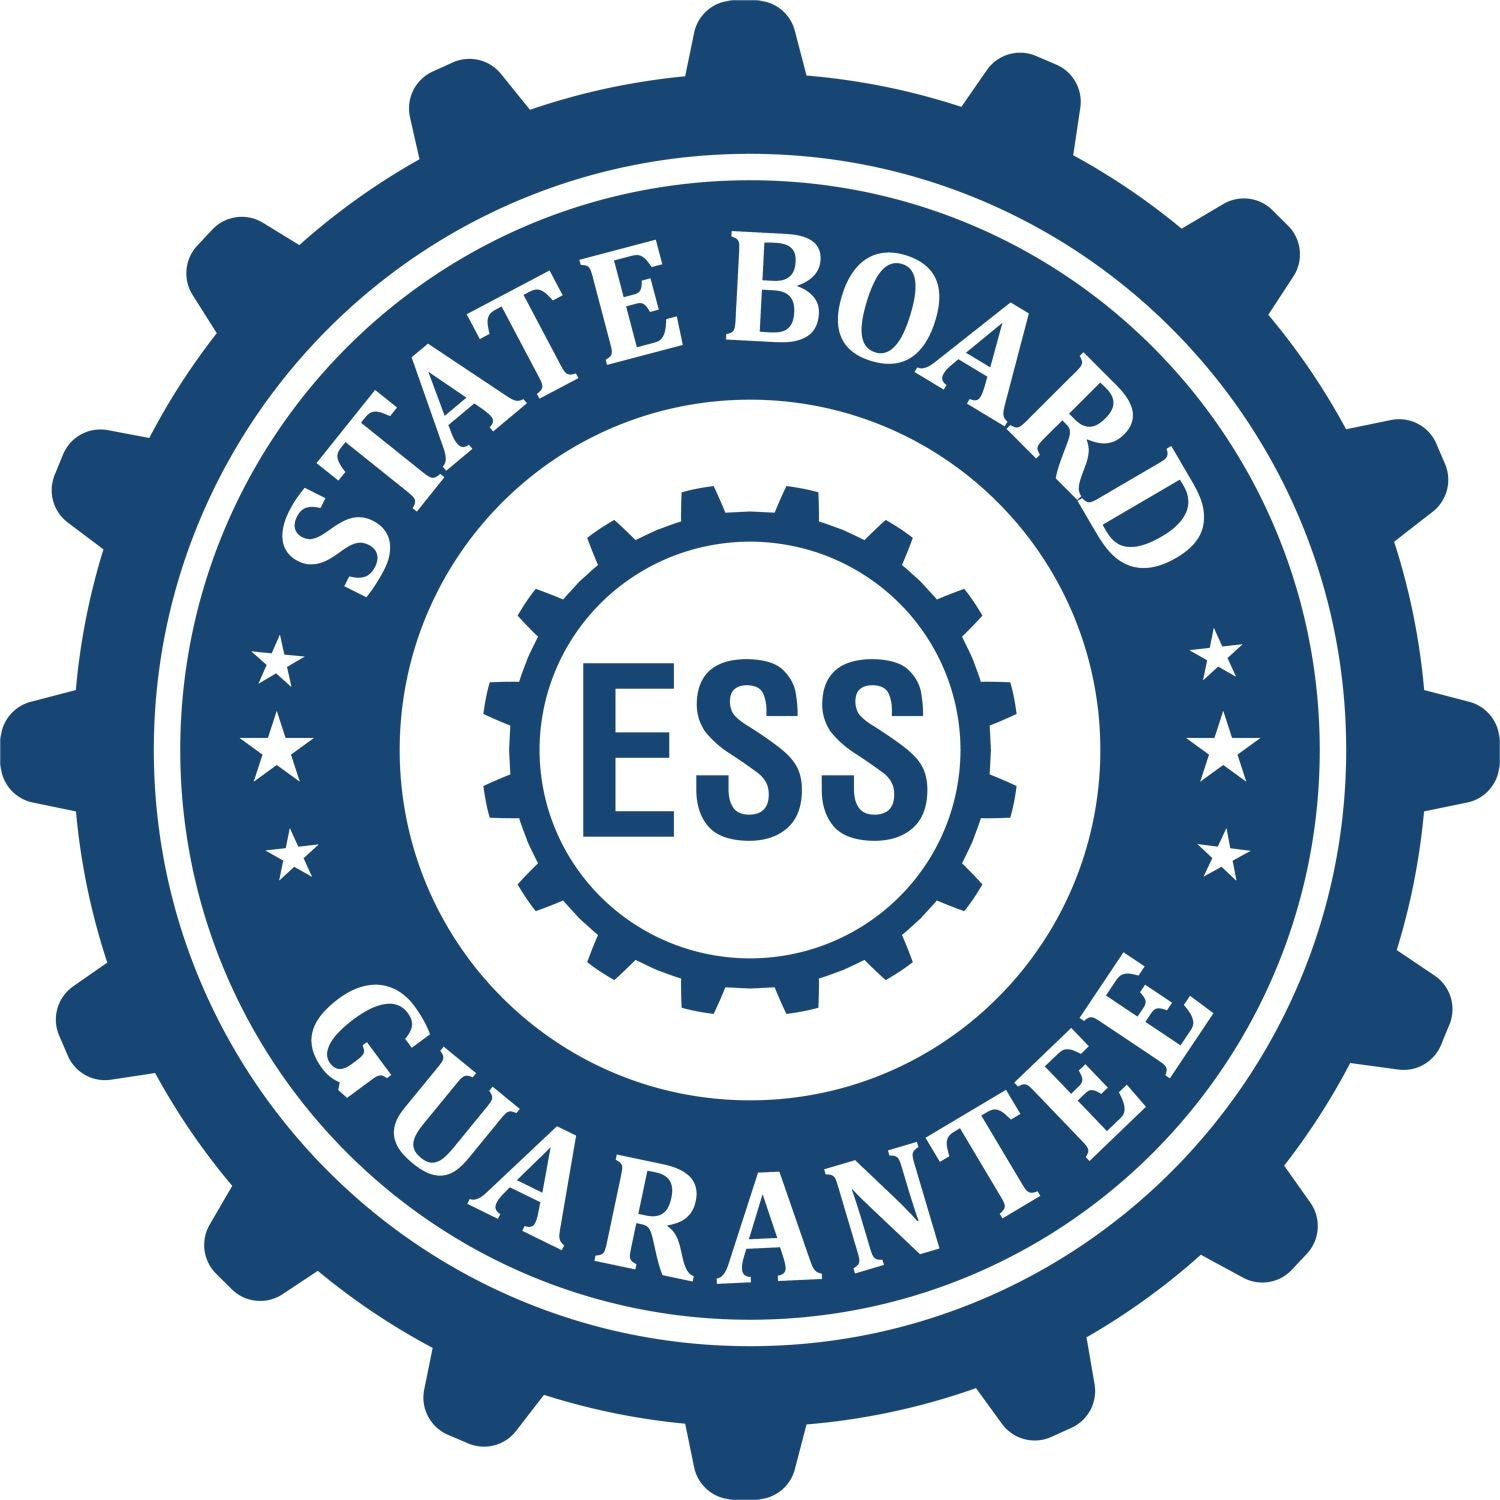 An emblem in a gear shape illustrating a state board guarantee for the Heavy Duty Cast Iron Arkansas Architect Embosser product.